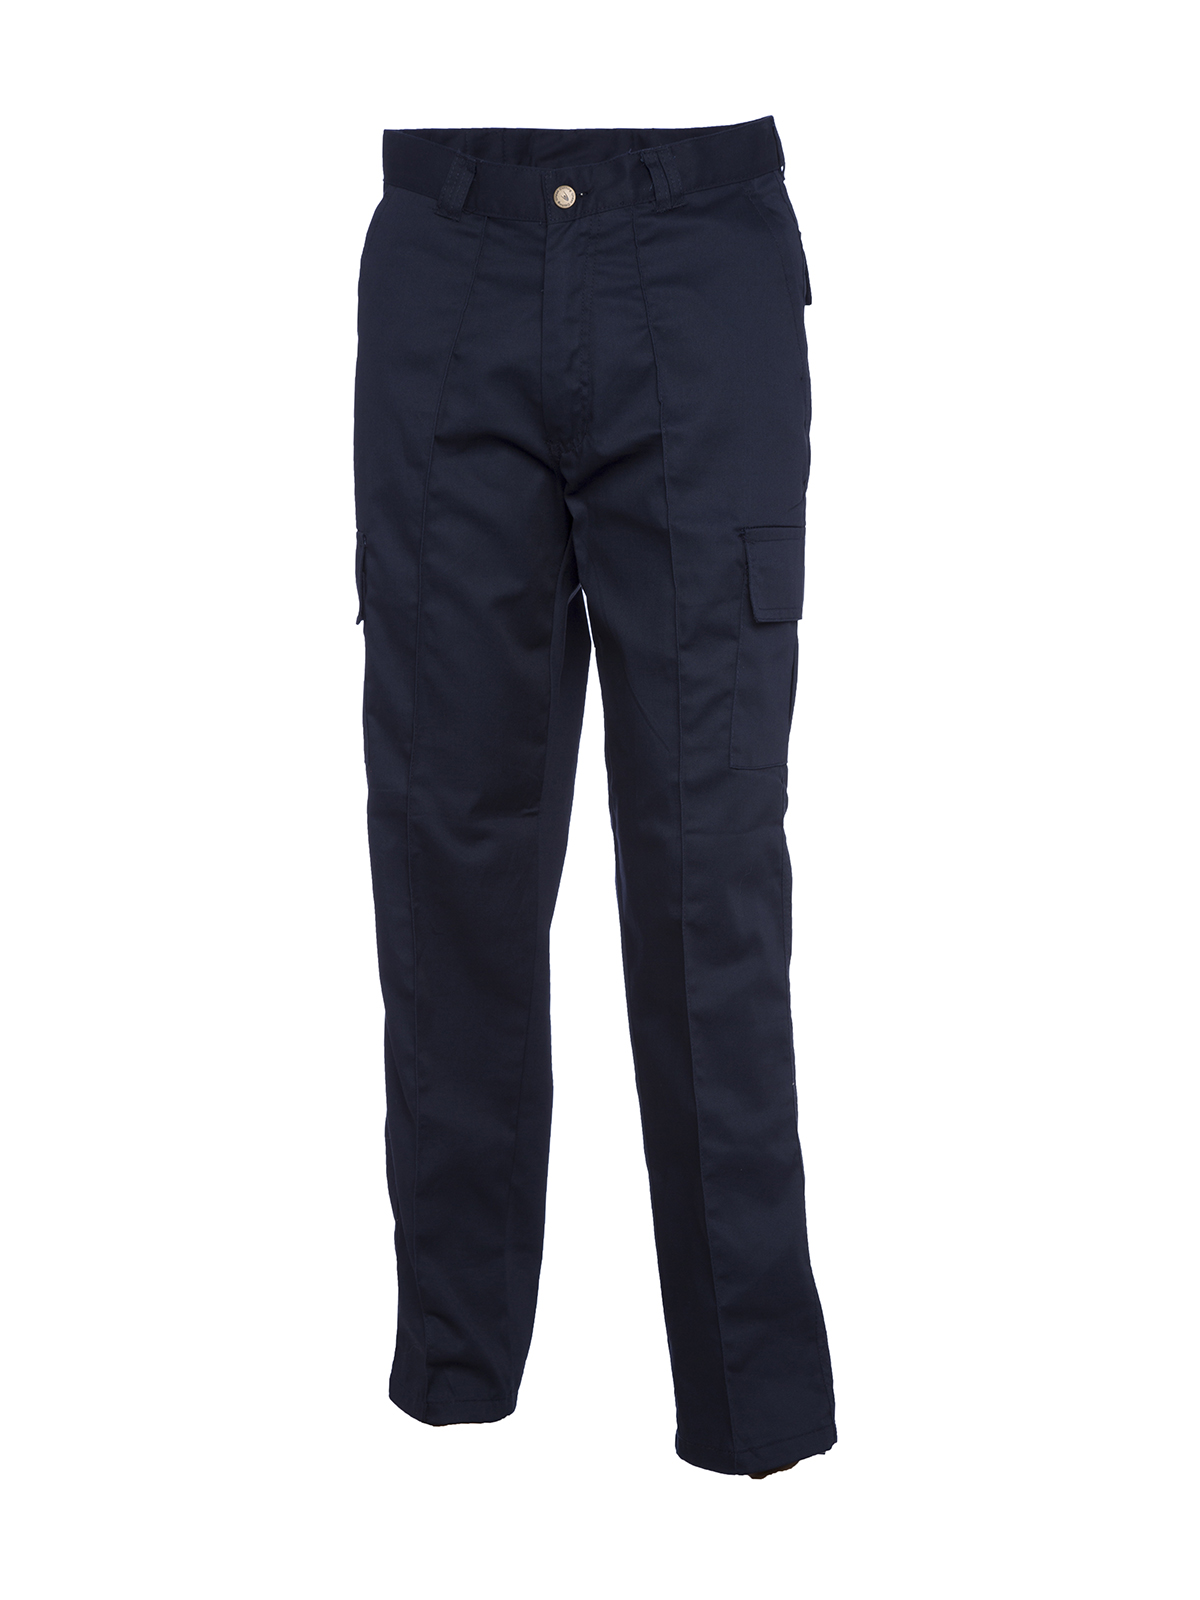 Cargo Trousers, Navy Blue - 30L